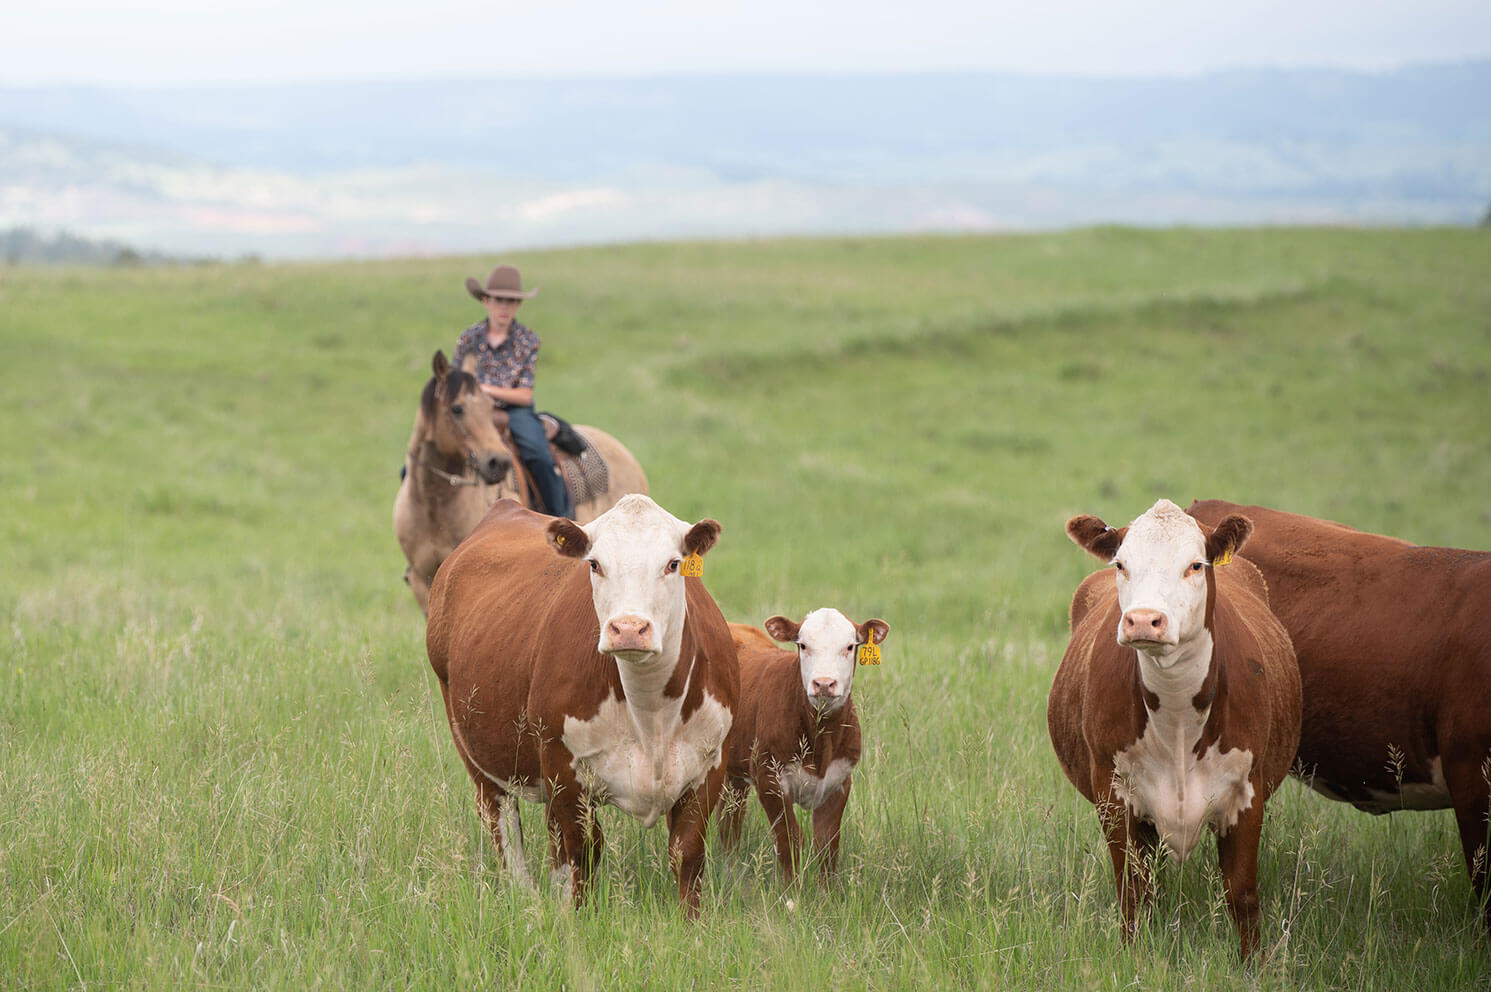 Image of cattle in a field with mountains in the distance